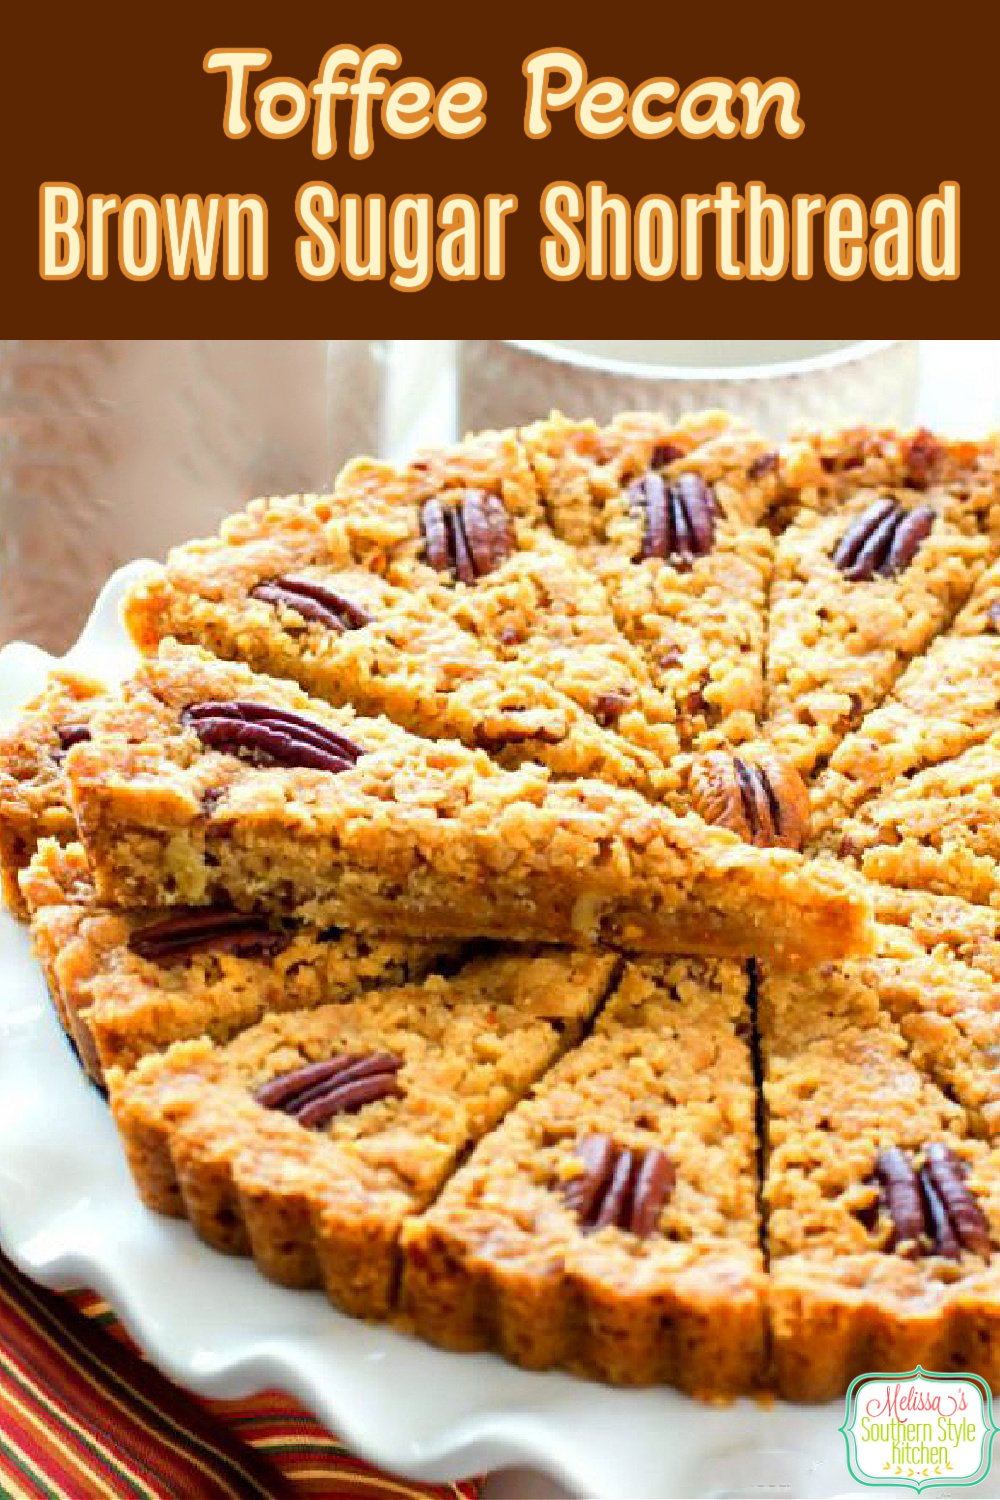 This rich buttery Toffee Pecan Brown Sugar Shortbread is impossible to resist #brownsugarshortbread #pecans #shortbread #toffee #desserts #dessertfoodrecipes #southernfood #southernrecipes #teatime #brunch #holidaybaking via @melissasssk